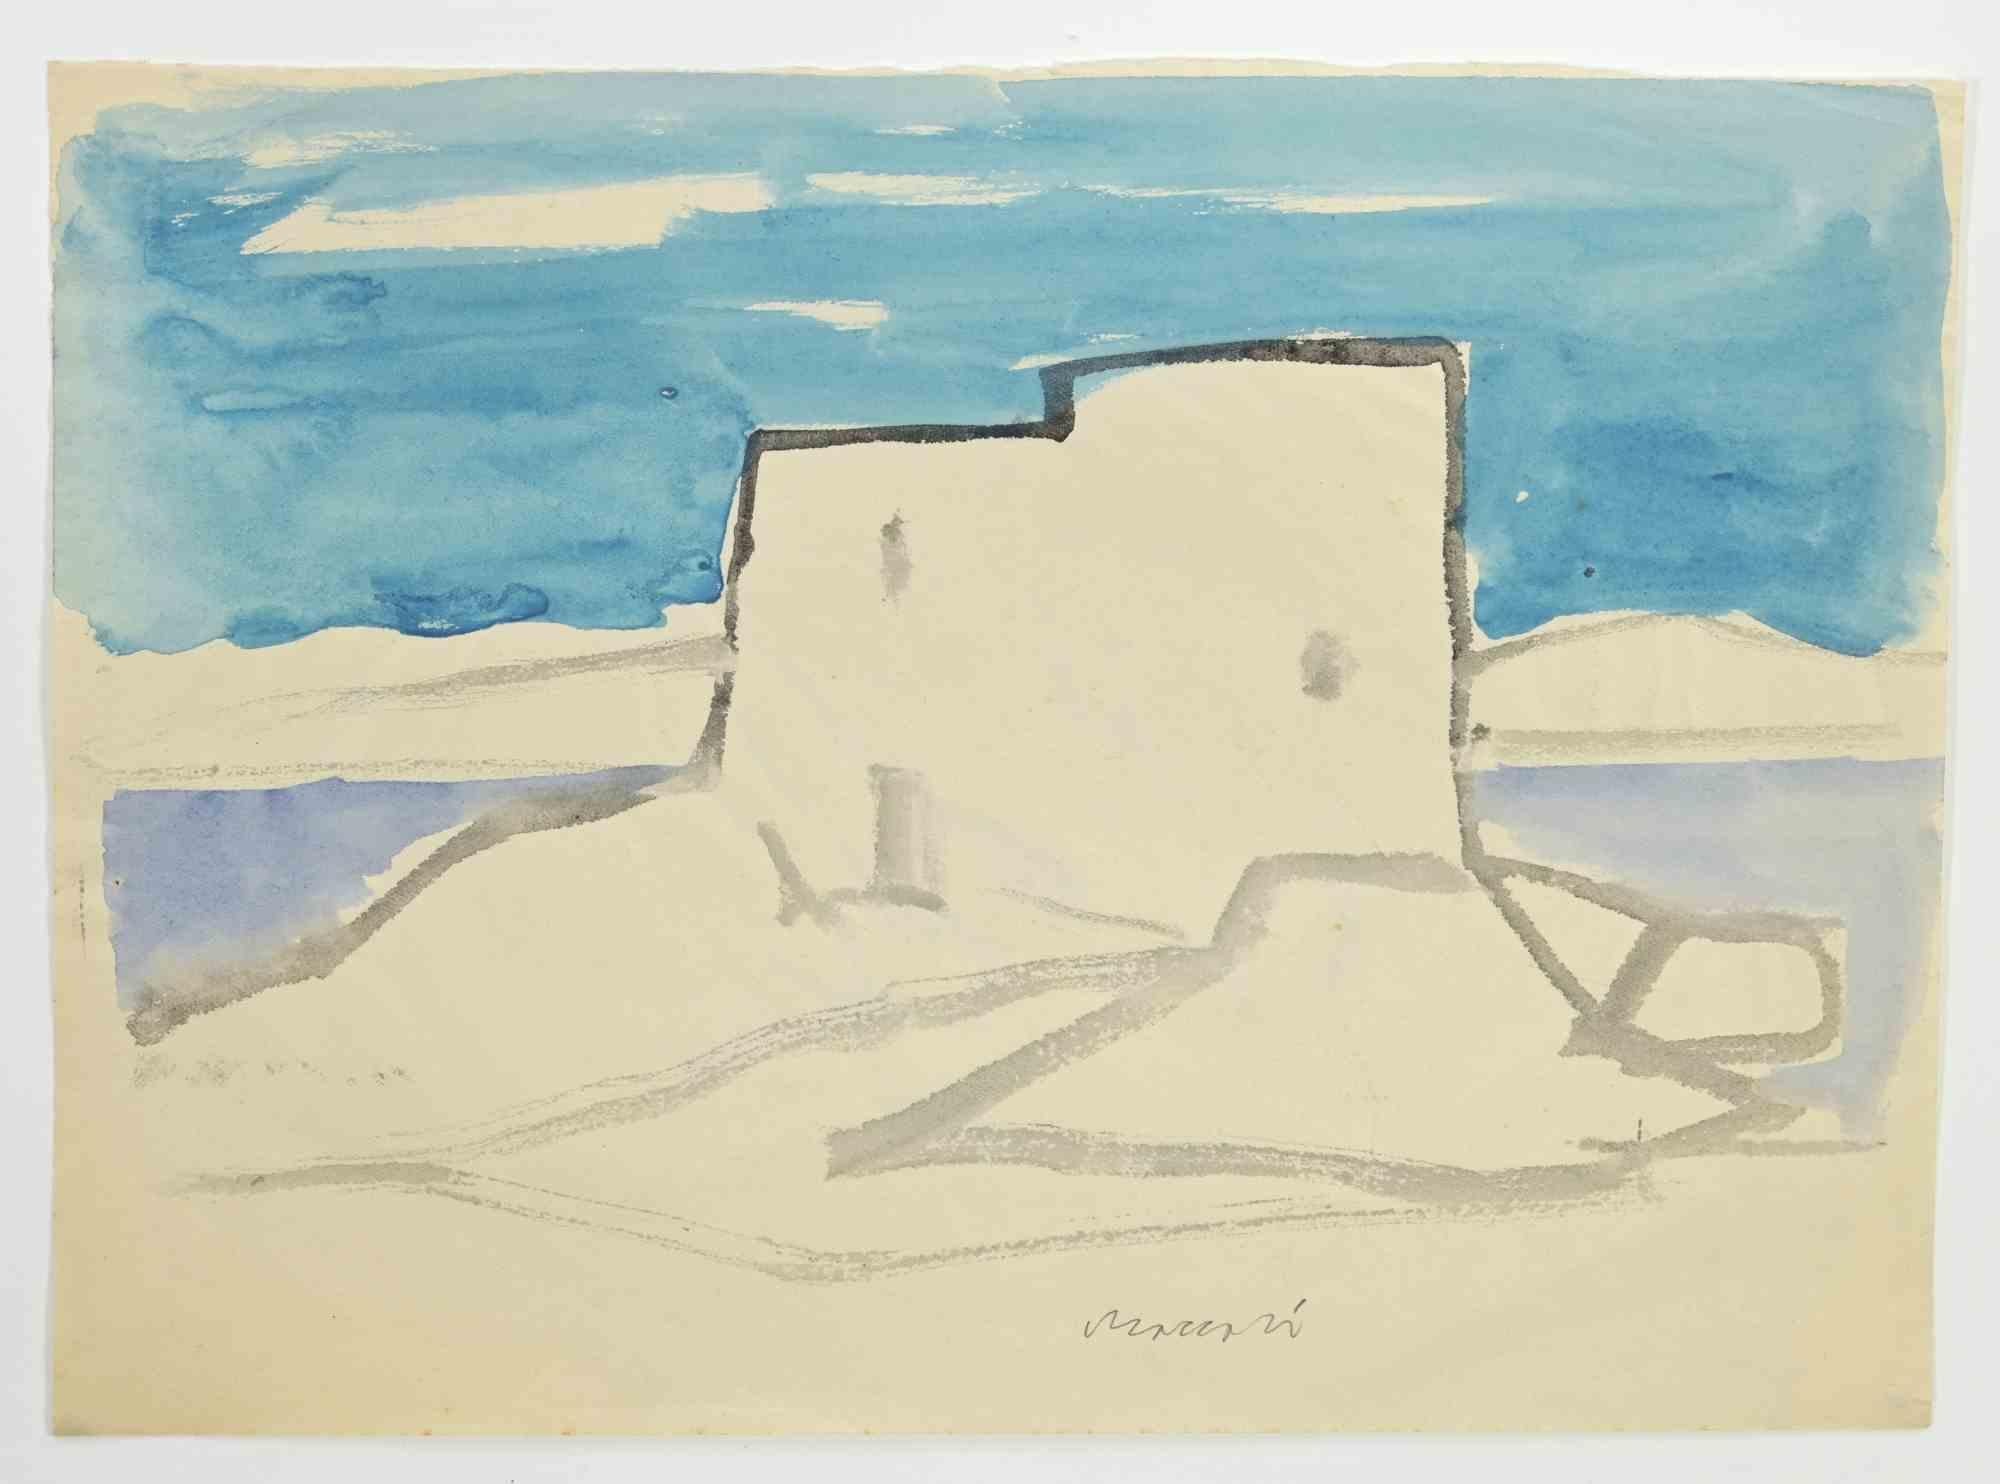 The Seascape is a Watercolor Drawing realized by Mino Maccari  (1924-1989) in the 1960s.

Hand-signed on the lower.

Good condition.

Mino Maccari (Siena, 1924-Rome, June 16, 1989) was an Italian writer, painter, engraver and journalist, winner of